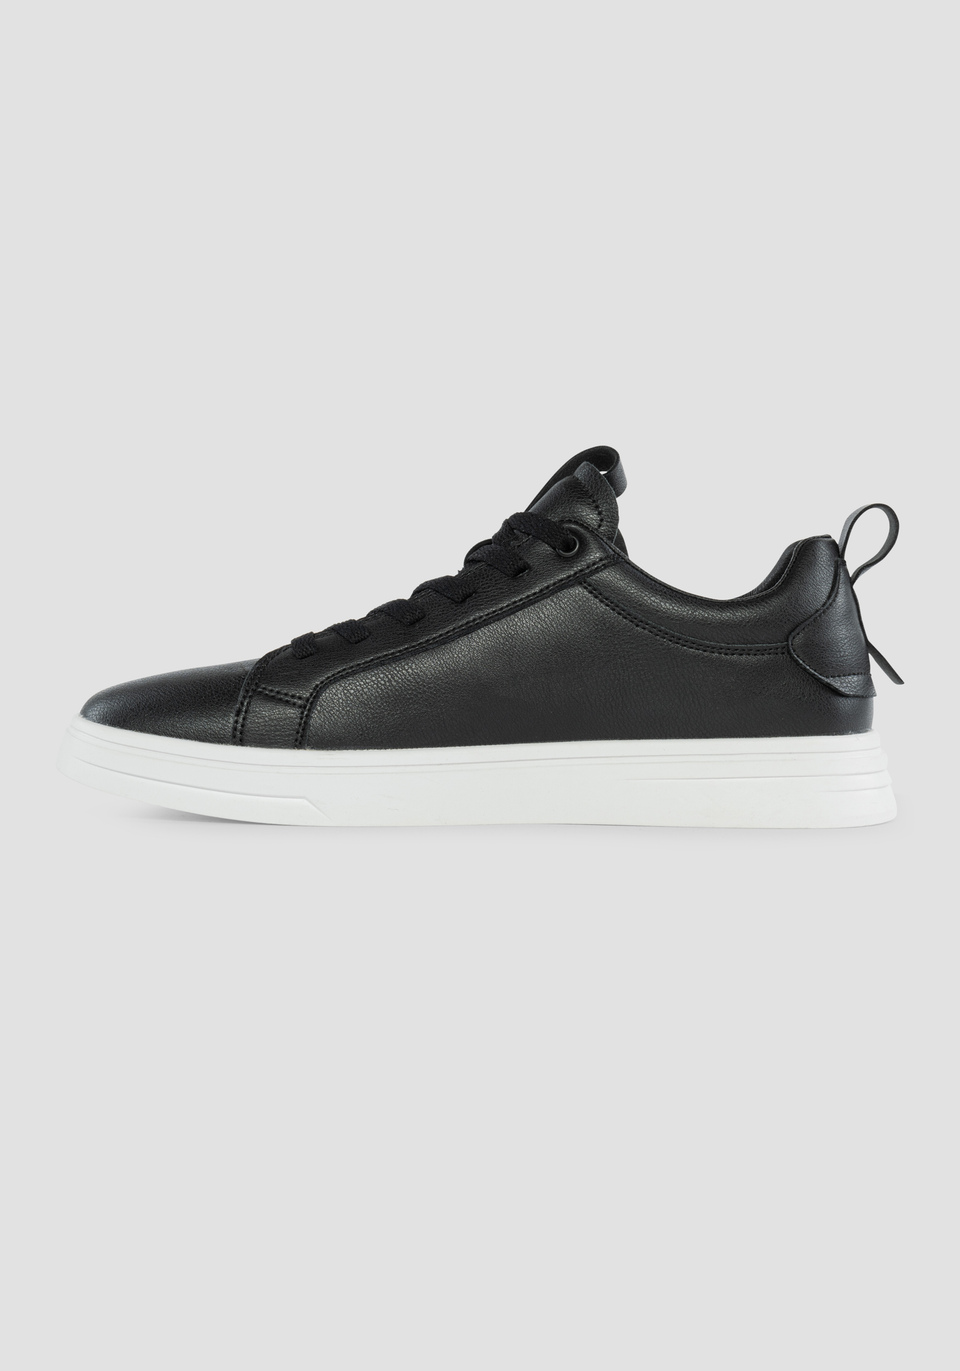 "GORE" LOW-TOP SNEAKERS IN TUMBLED FAUX LEATHER WITH SIDE DETAILS - Antony Morato Online Shop